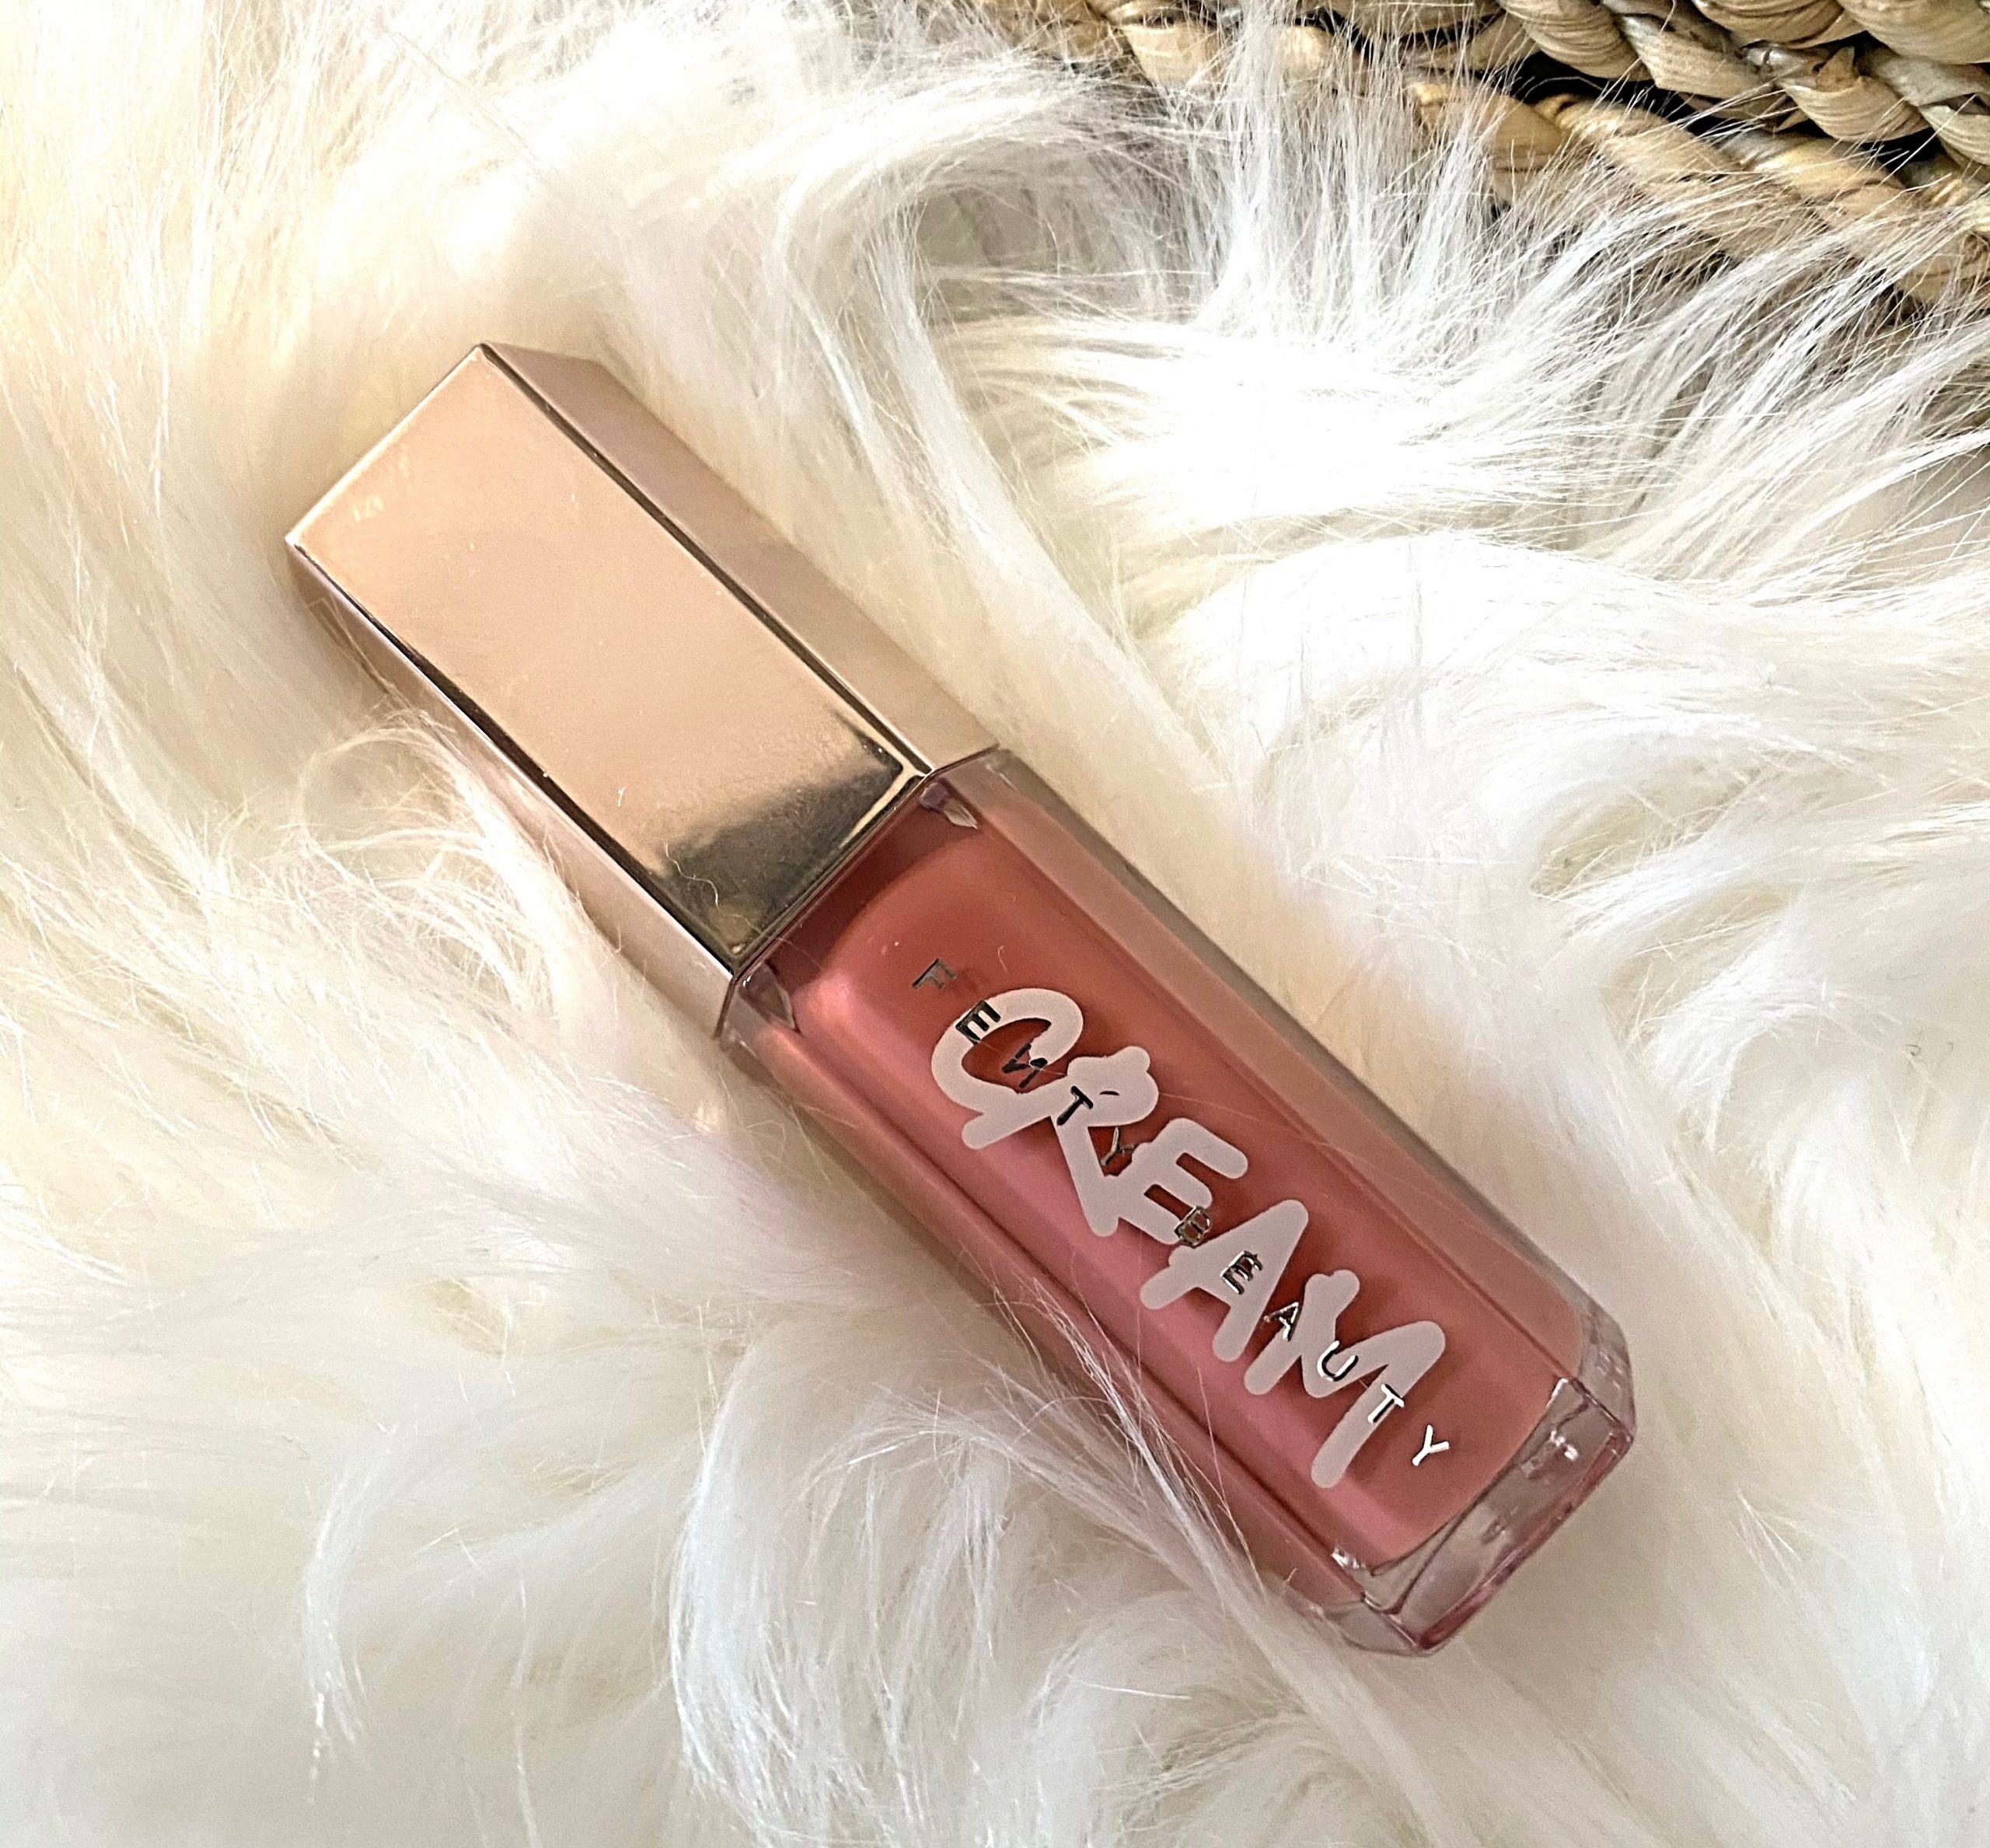 Fenty Beauty gloss bomb cream review: Is it as good as the